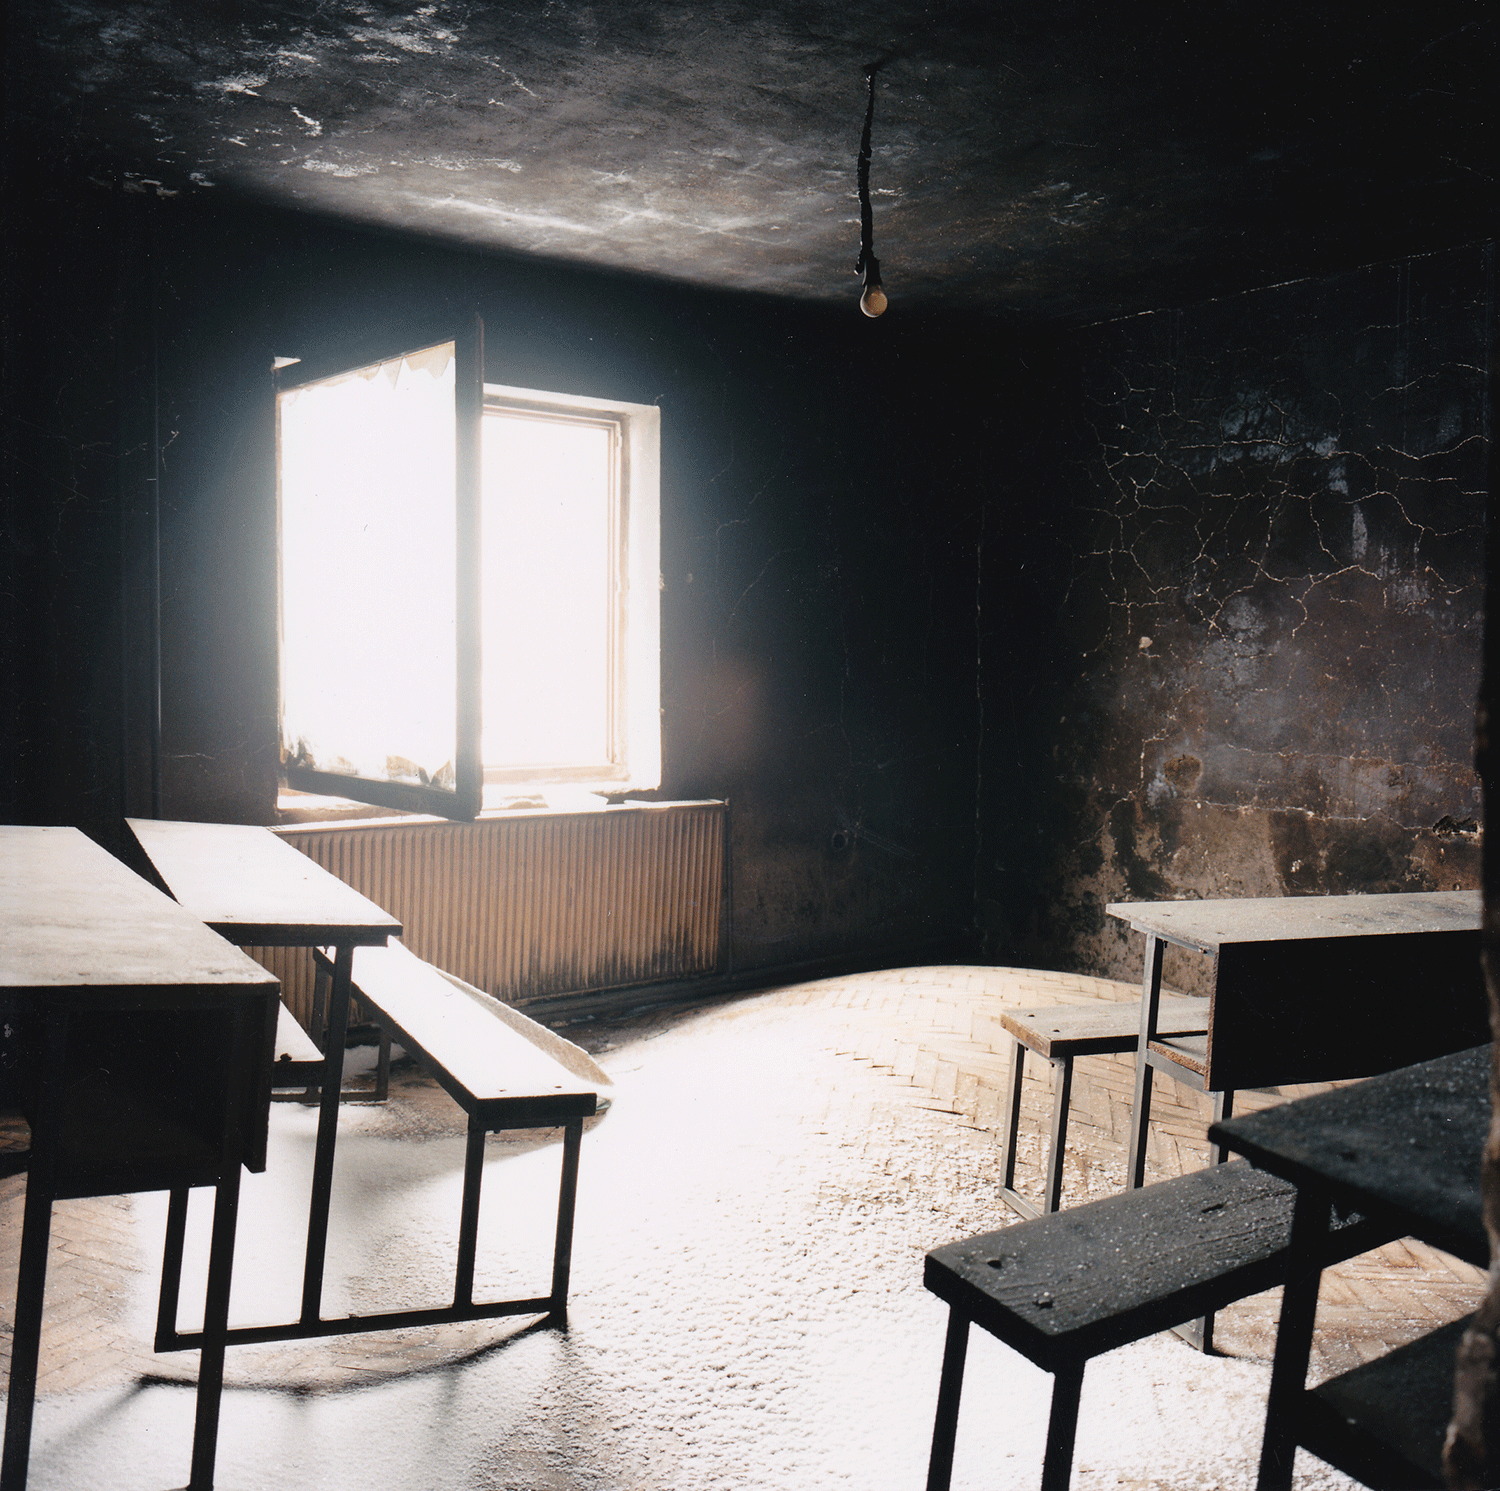  Schoolroom, Prishtina, September 30, 1999. “Before the war, I was constantly looking out of the window, terrified that the police would come and kill my husband and my family because of the school. Now it is time to work and rebuild, Ishalla. We’ll 